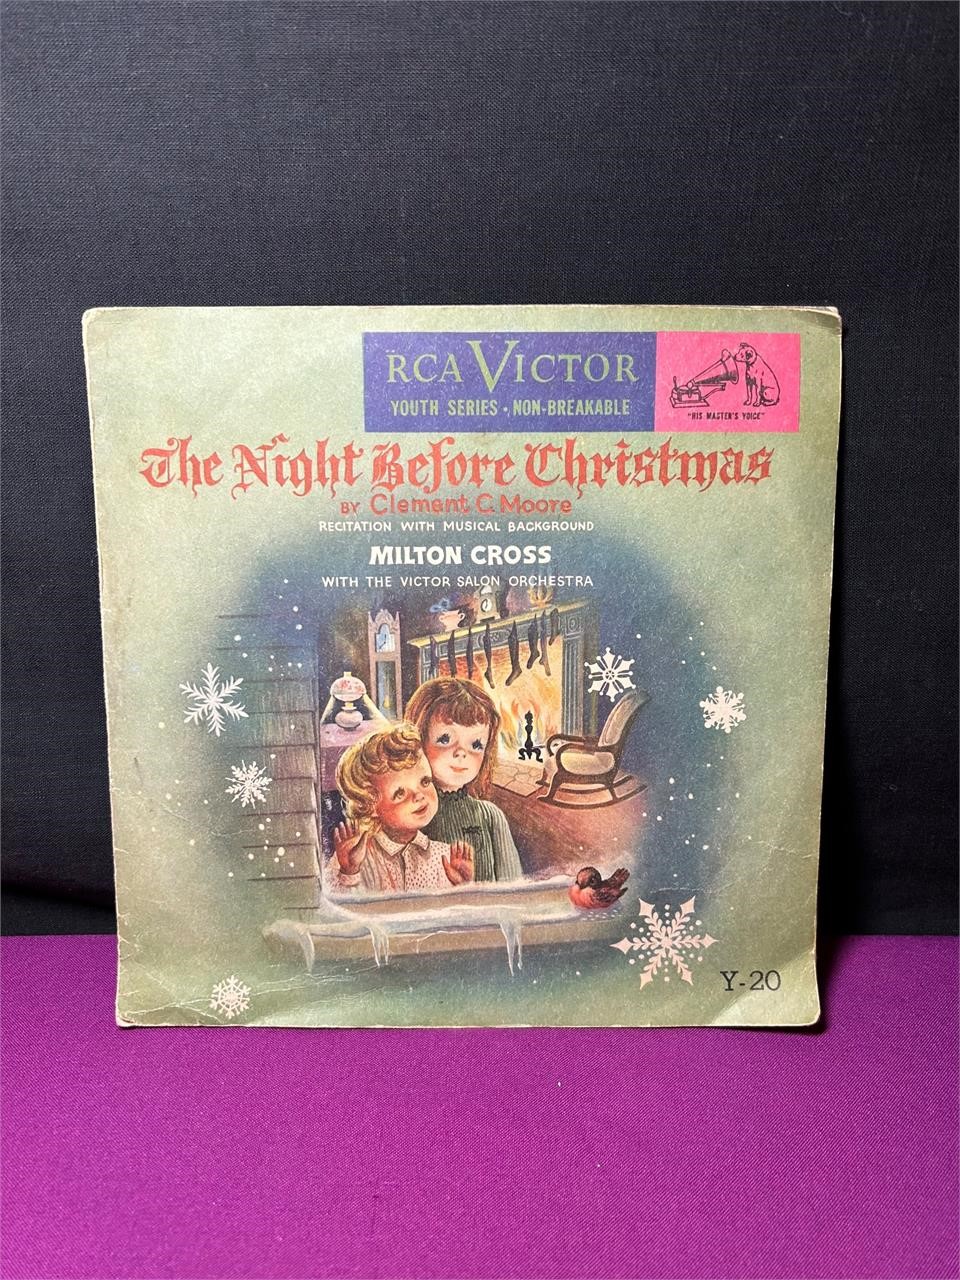 RCA Victor Night Before Christmas Clement Moore